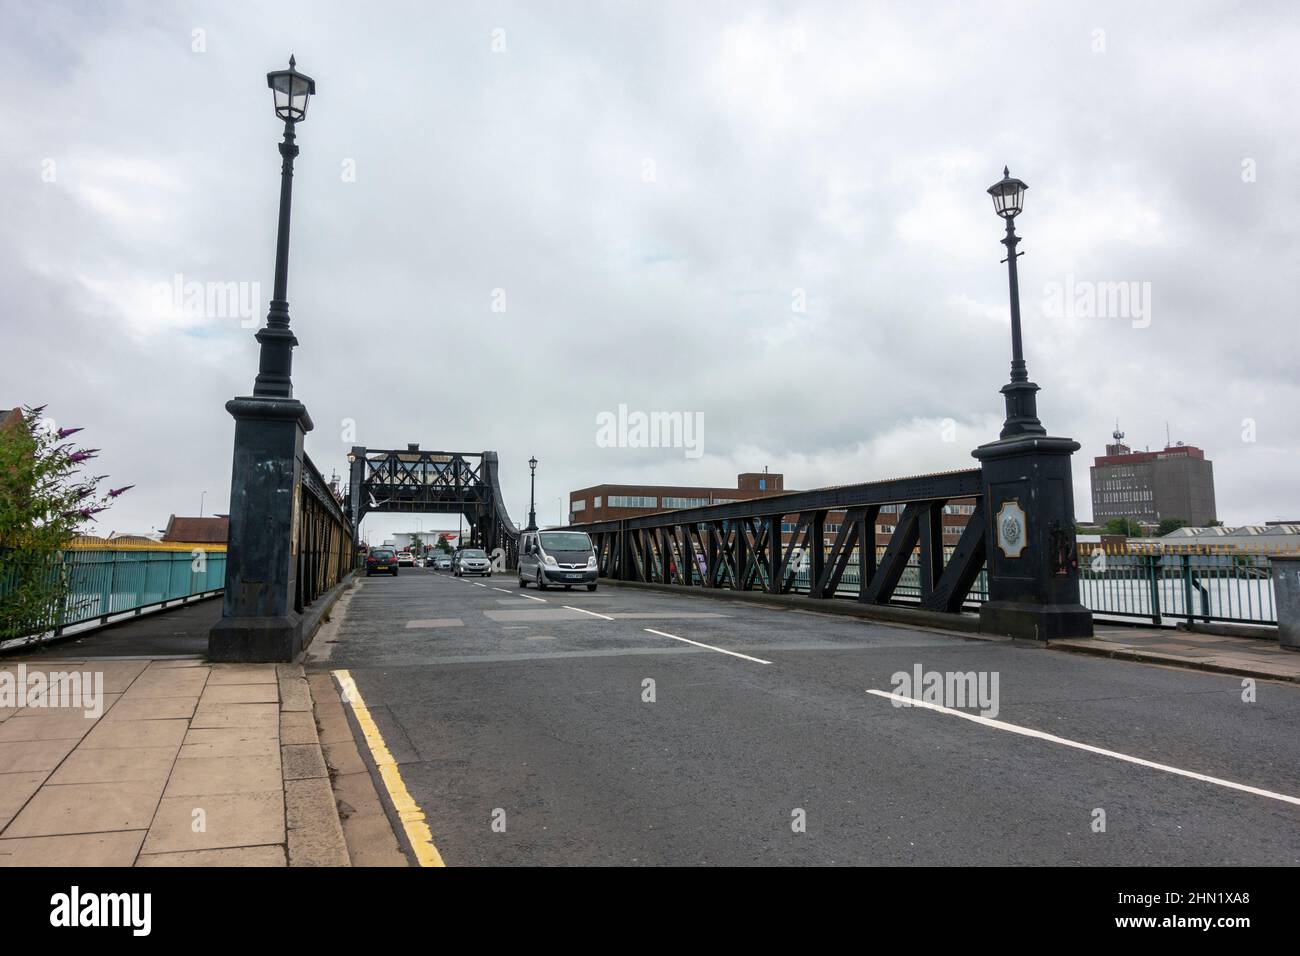 Traffic on the Corporation Bridge, a Scherzer rolling lift bascule bridge over the Old Dock (Alexandra Dock) in Grimsby, North East Lincolnshire, UK. Stock Photo